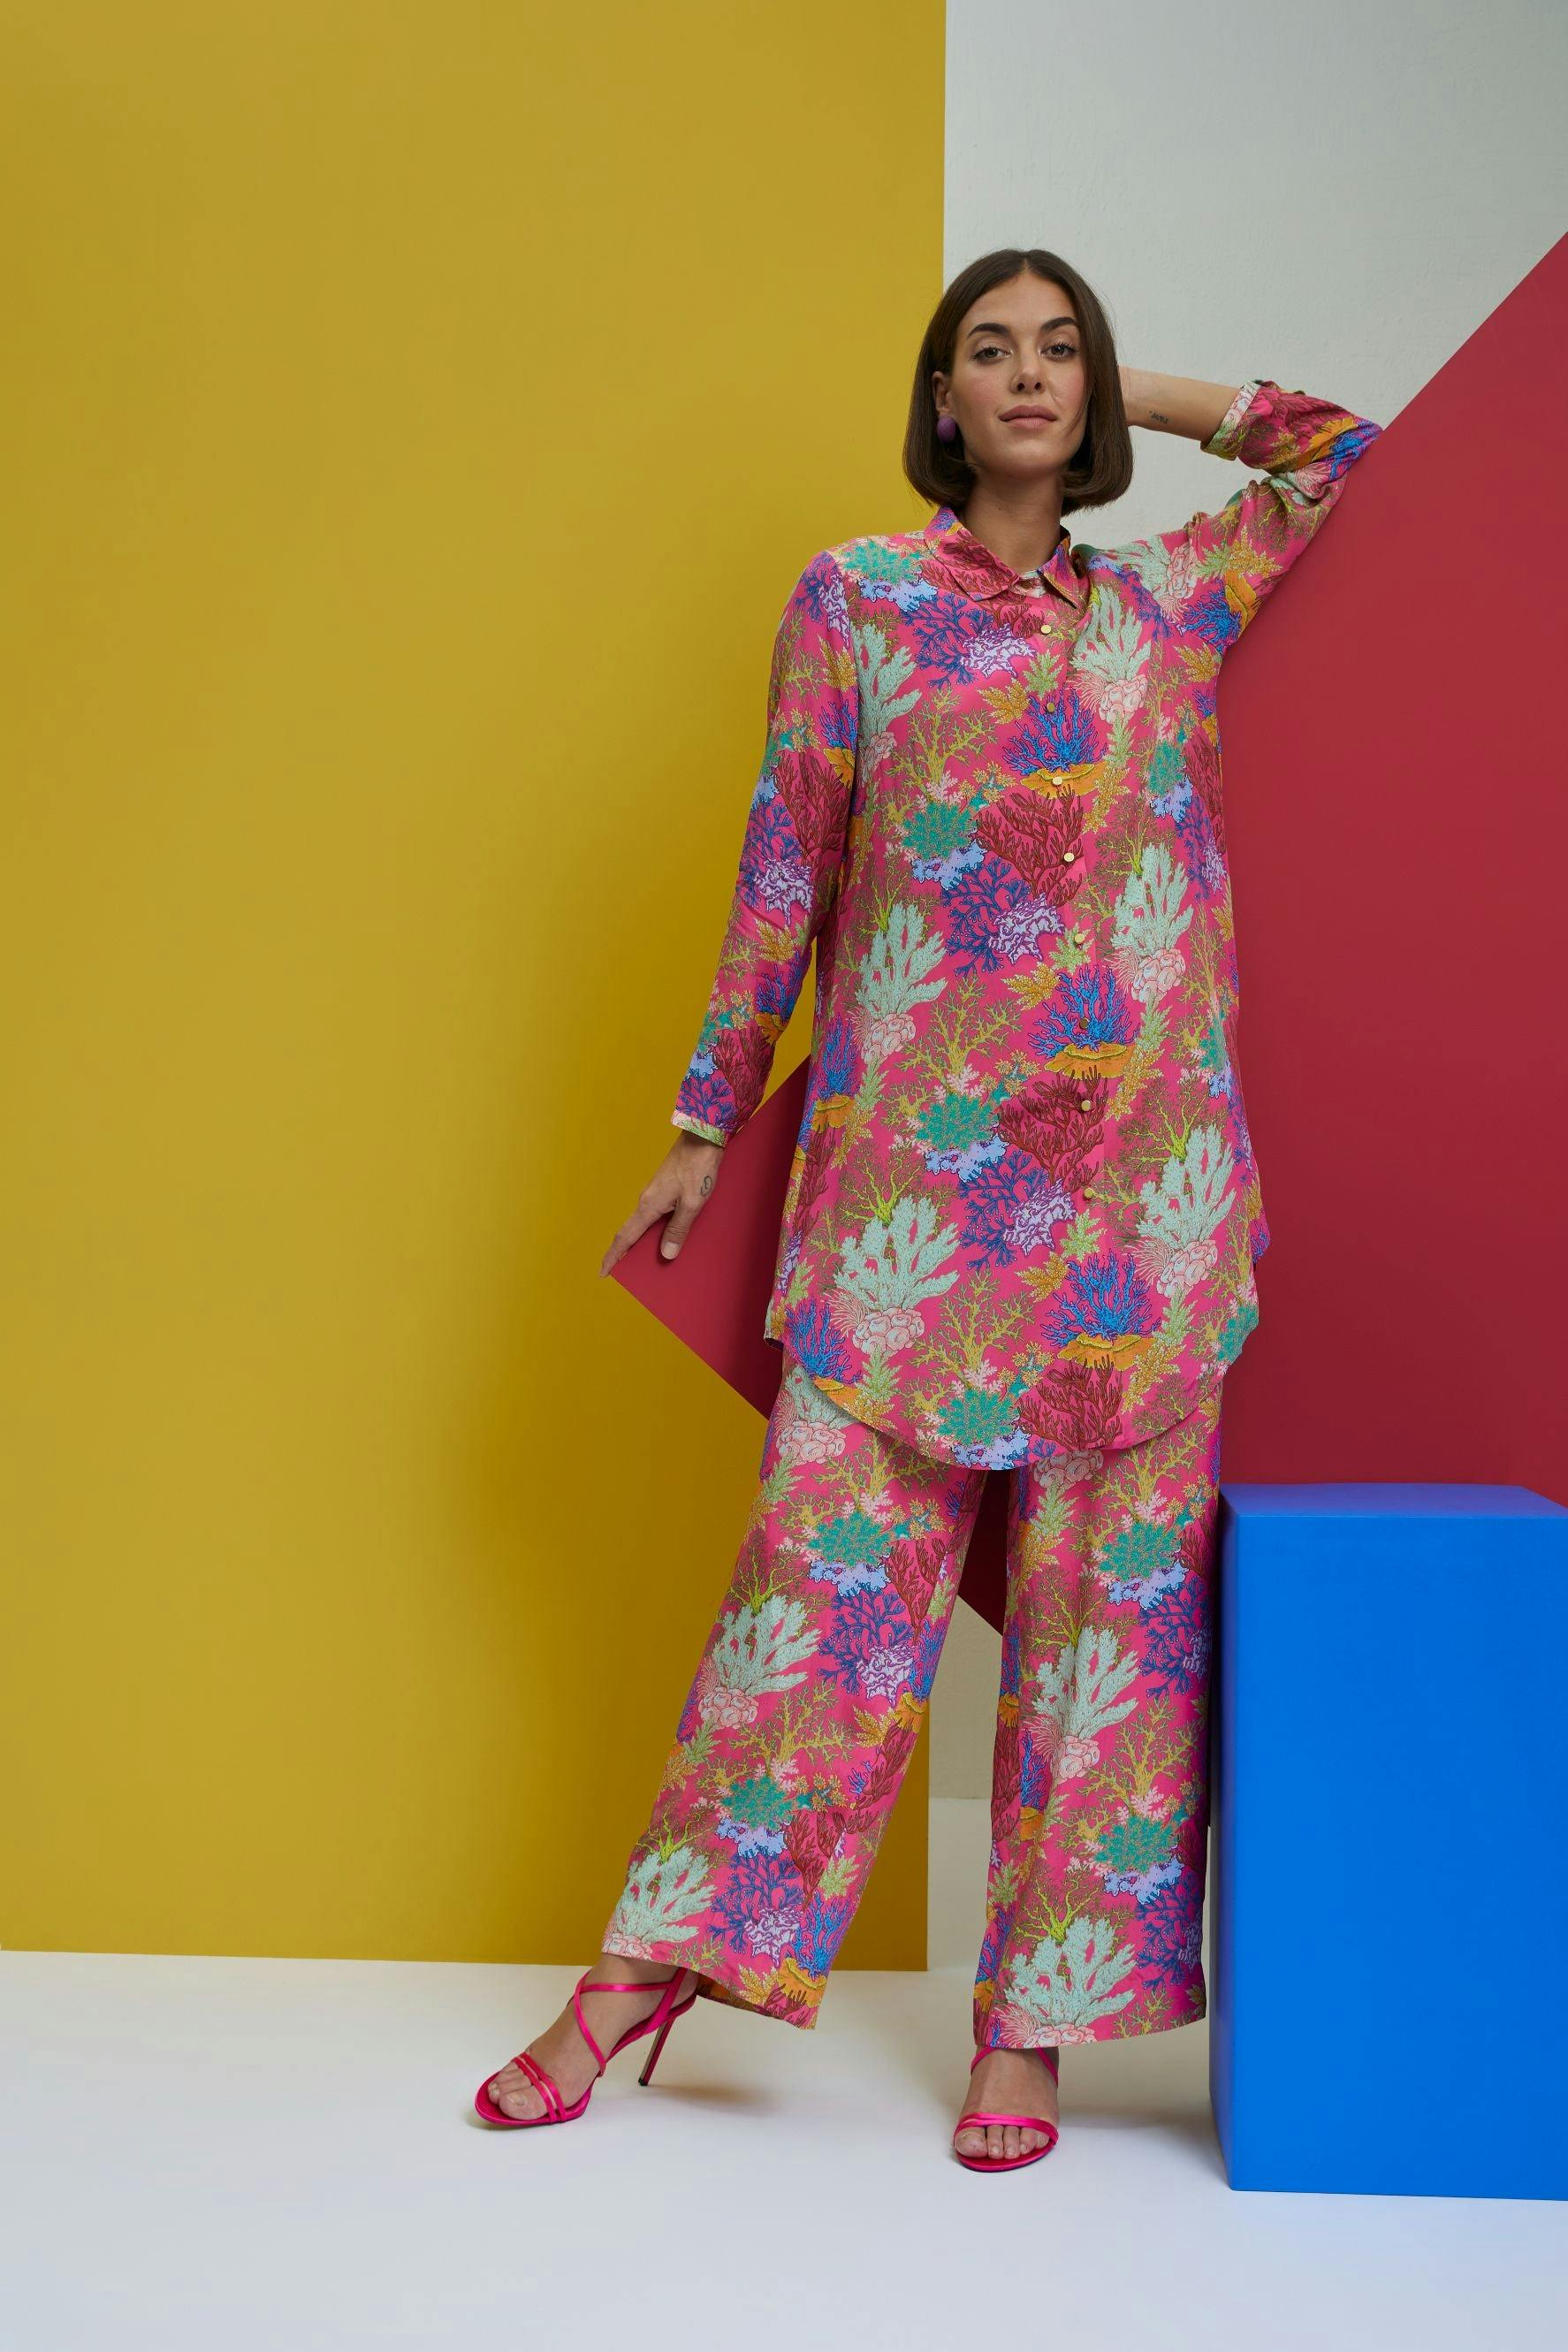 sea you - Over Size Long Shirt With Pants, a product by Nautanky